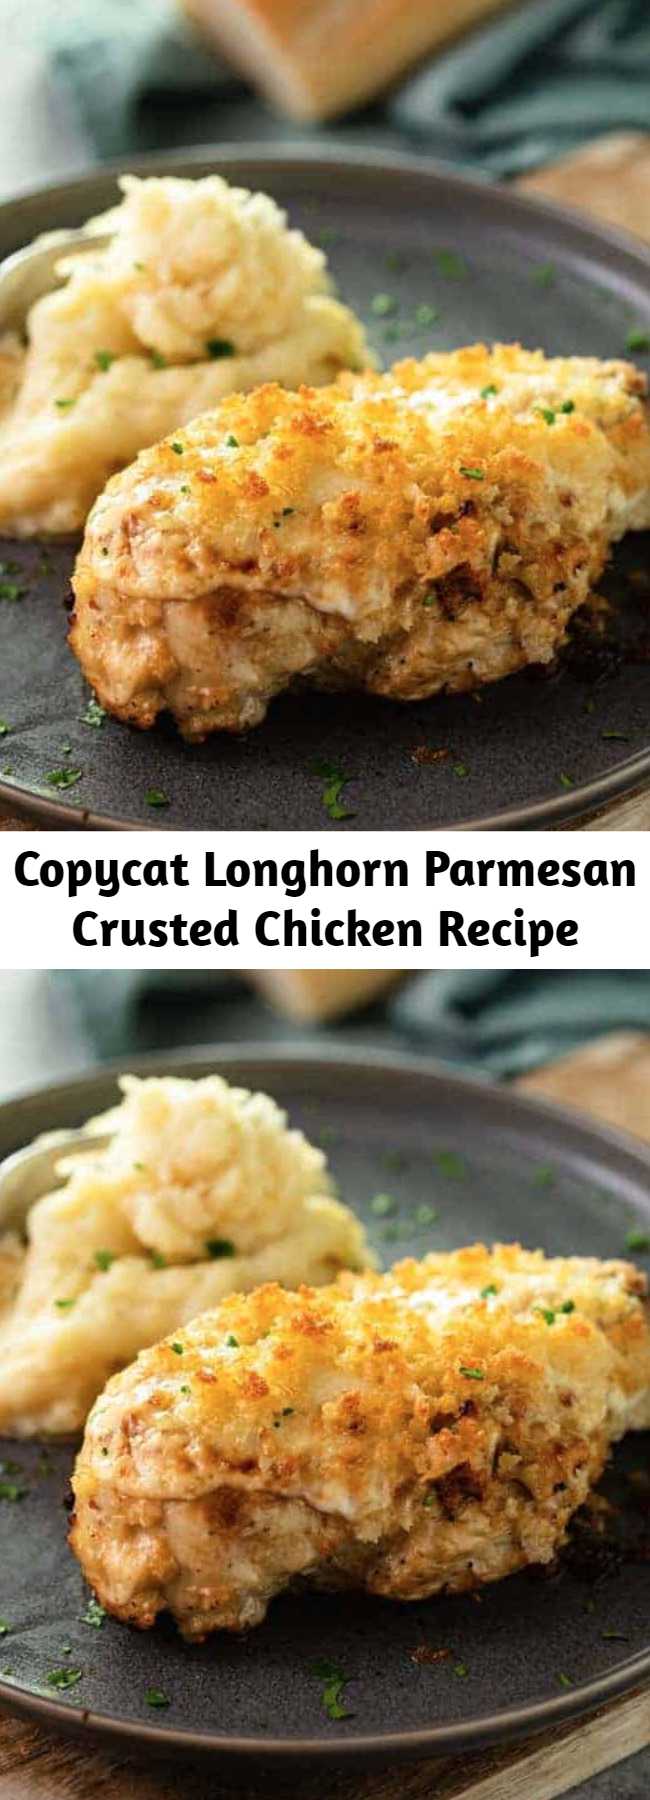 Copycat Longhorn Parmesan Crusted Chicken Recipe - This Copycat version of Longhorn's famous Parmesan Crusted Chicken tastes just like the restaurant! From the flavorful marinade, to the creamy, crunchy Parmesan Crust. #Longhorn #ParmesanCrustedChicken #Chicken #Copycat #Dinner